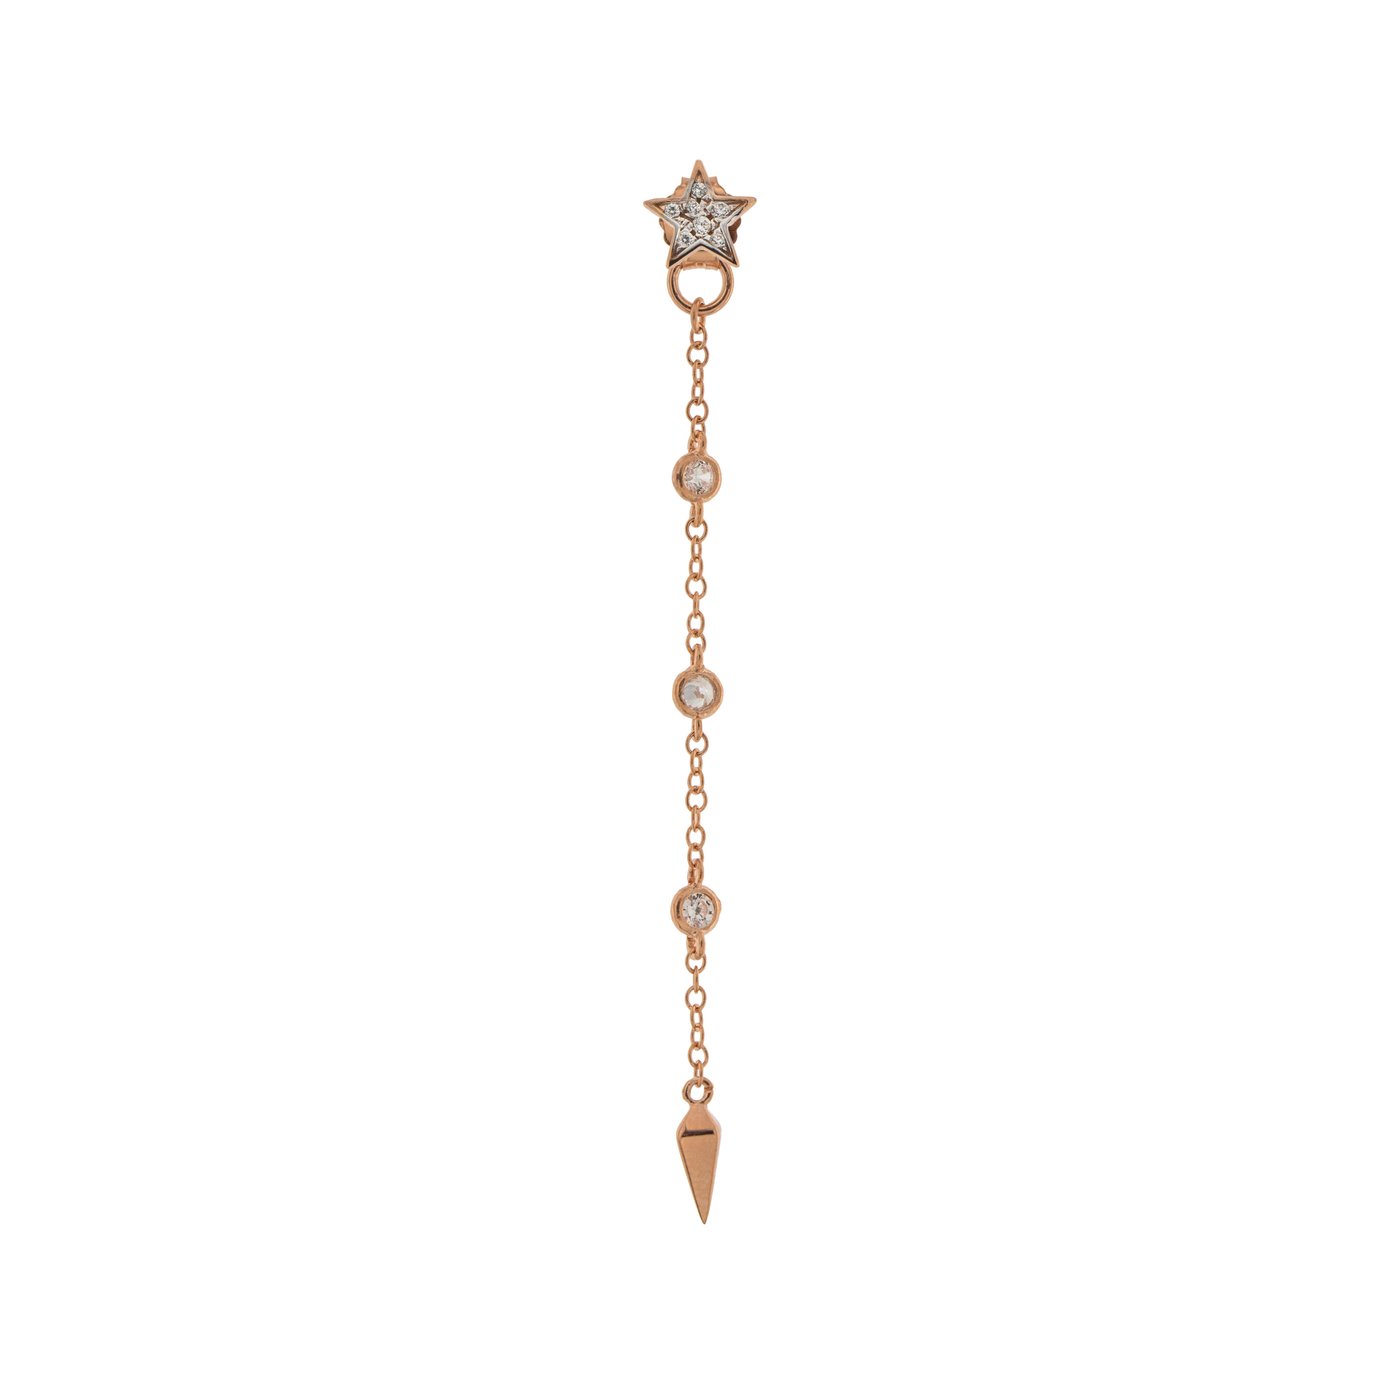 RUE DES MILLE - Single Earring with Chain and Spear